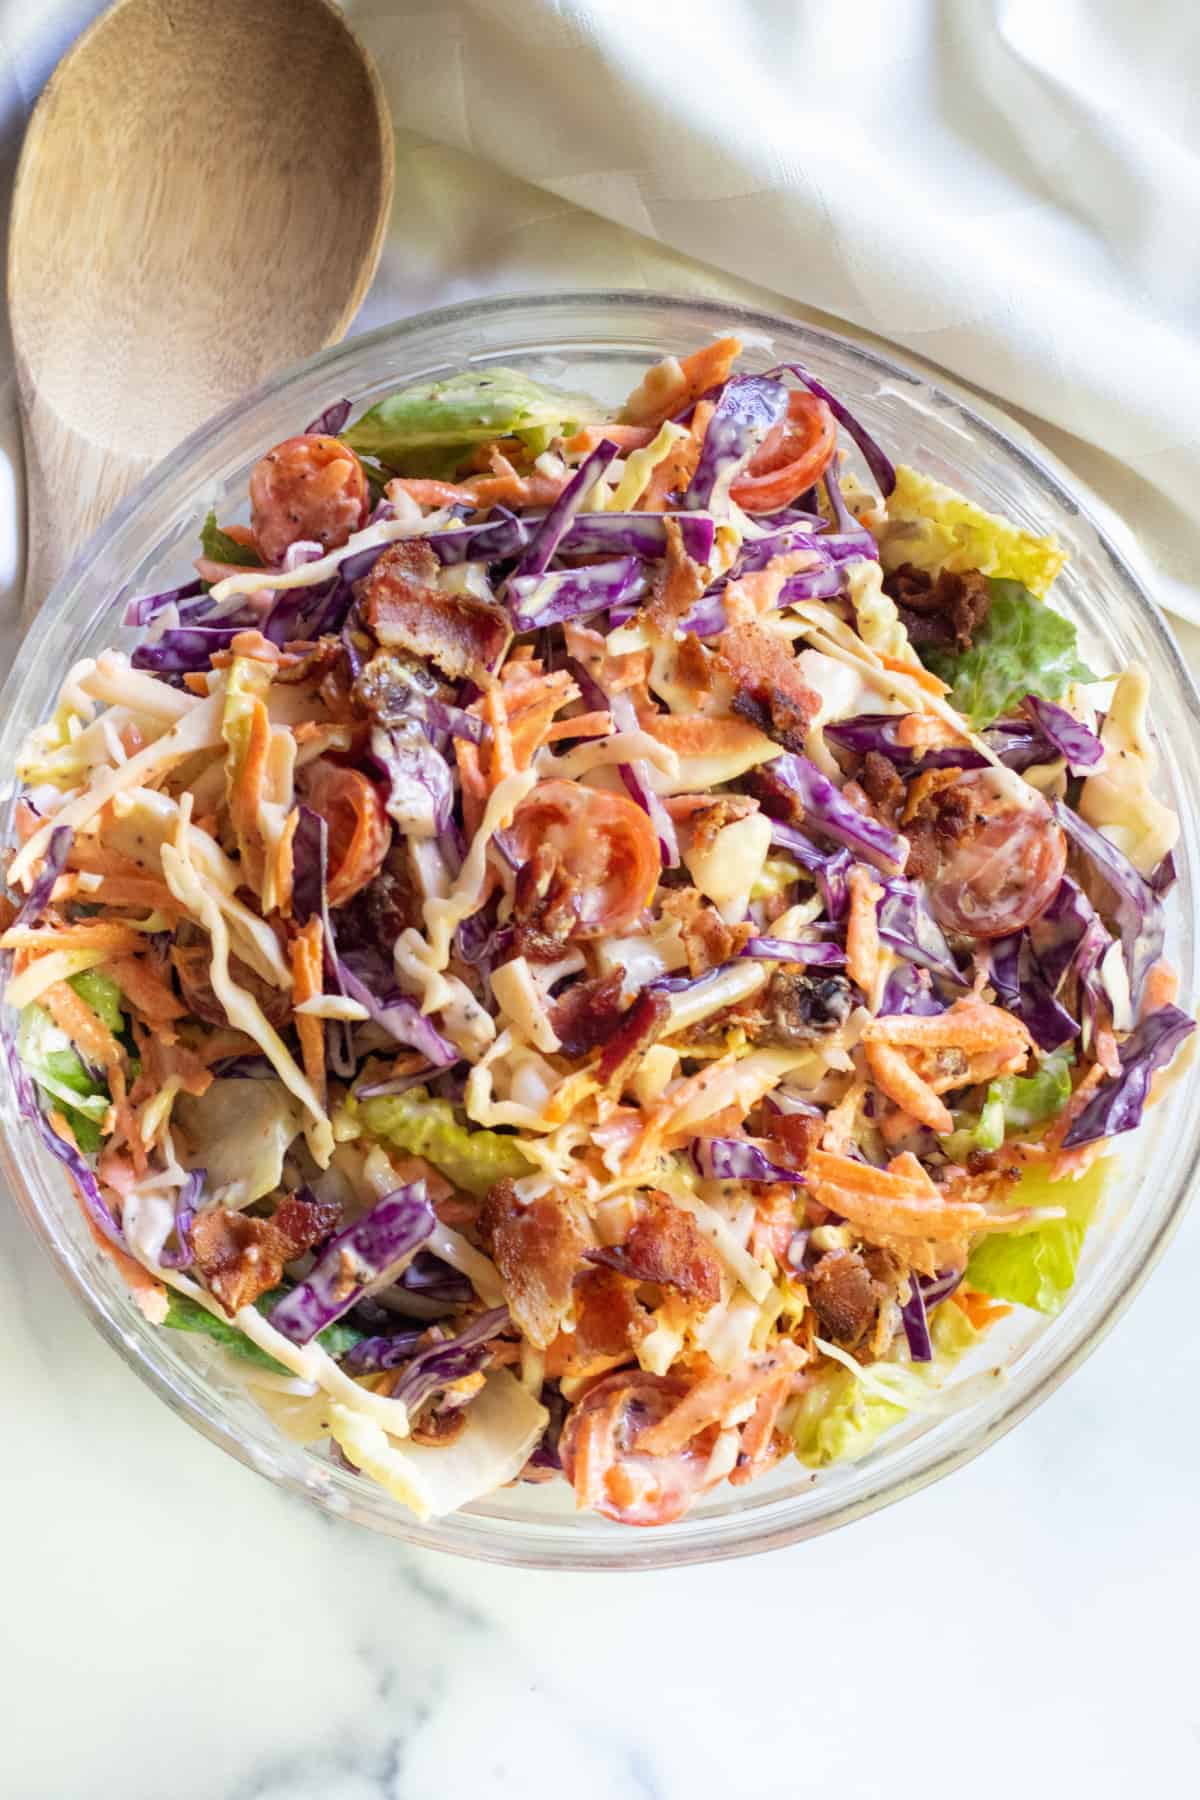 a bowl of coleslaw with bacon tomatoes and some lettuce.